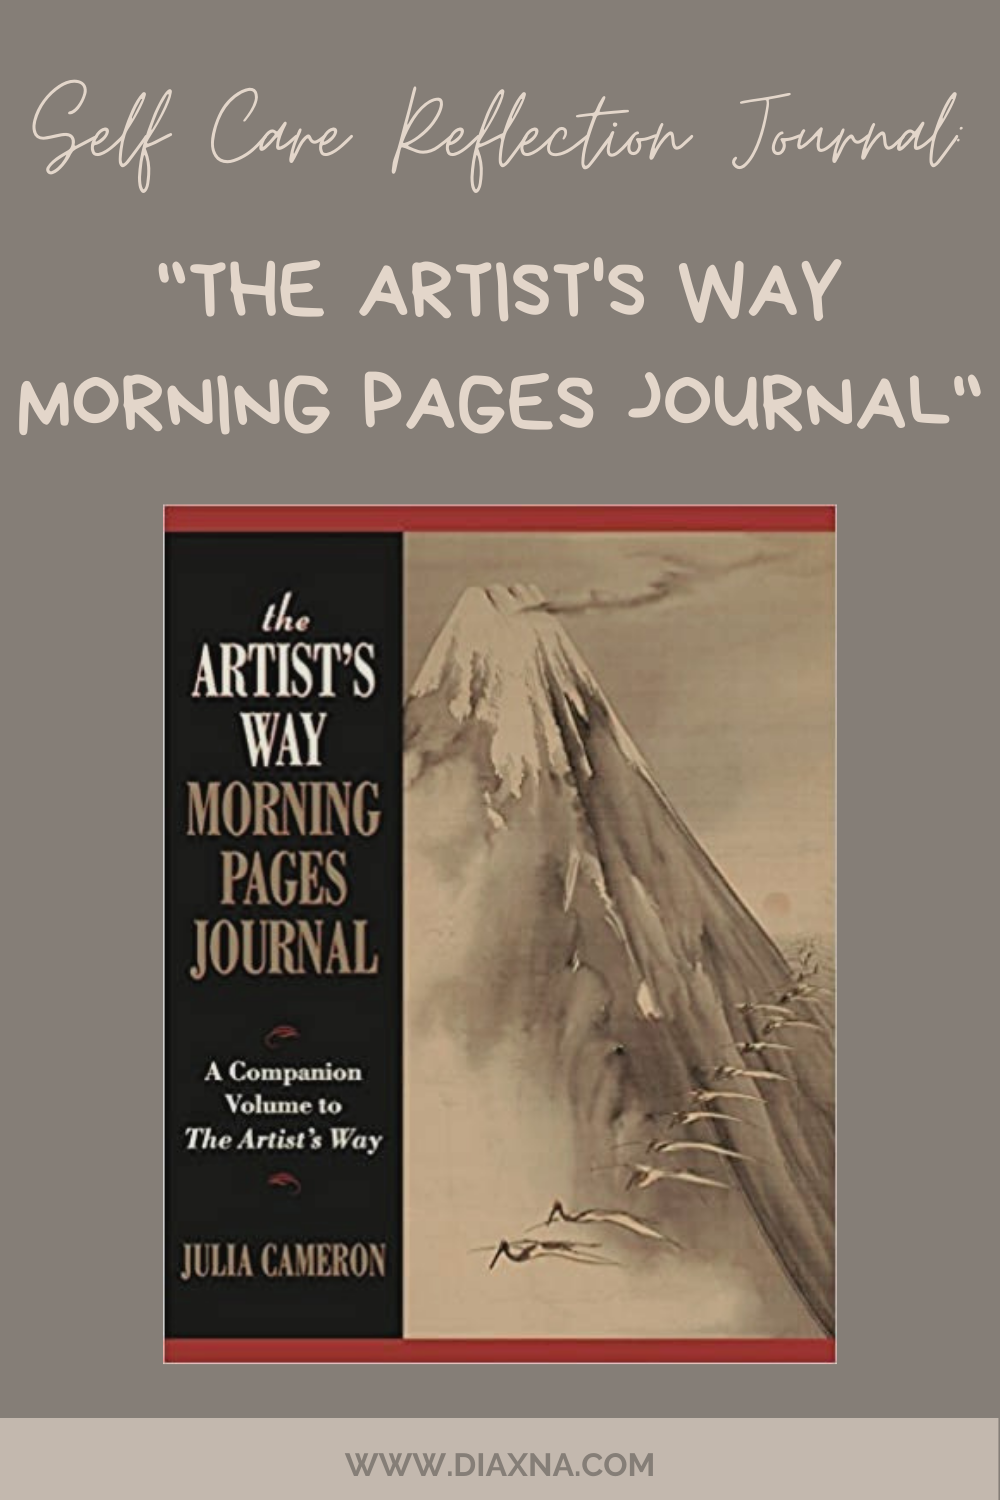 The Artist's Way Morning Pages Journal: A Companion Volume to the